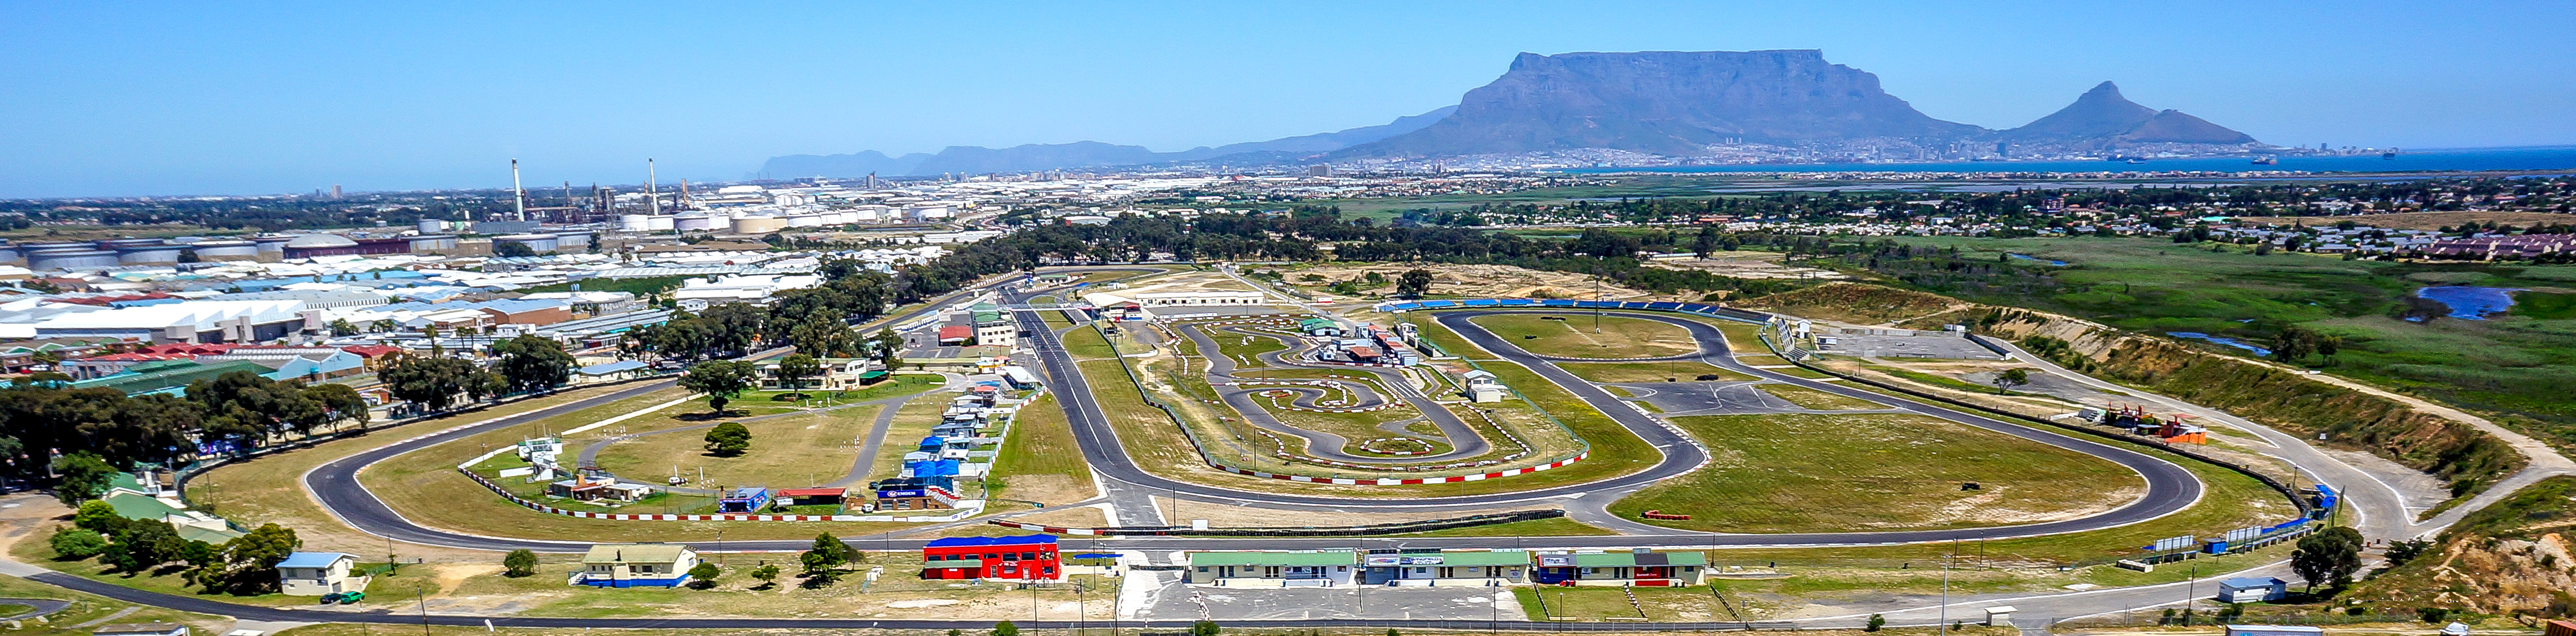 Killarney Race Track in Tableview Cape Town